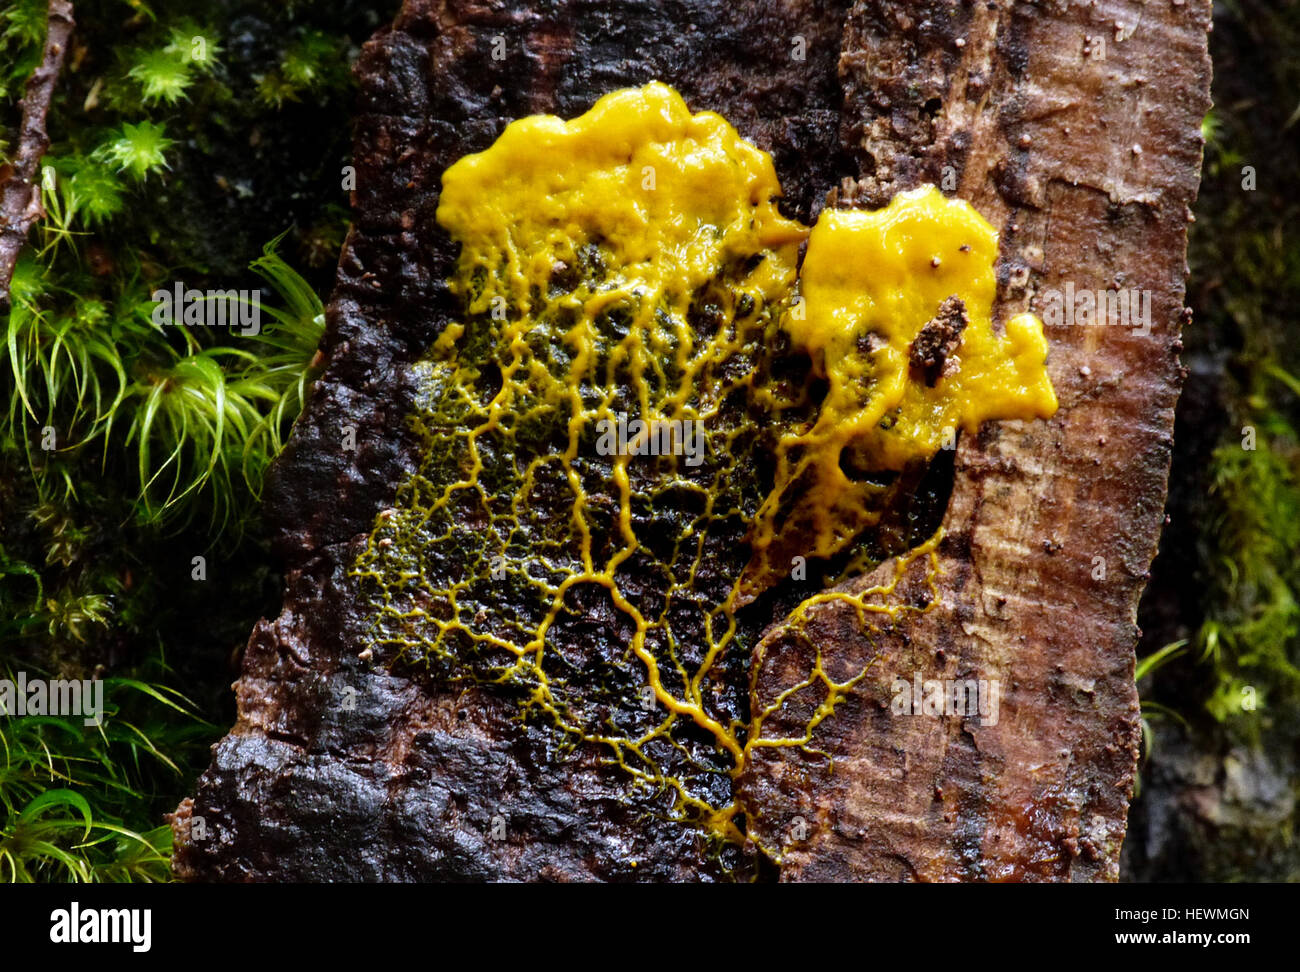 Members of this class are commonly referred to as slime moulds. These have thought to belong to both animal and fungi kingdoms at one time or another. It's now known that they are quite unrelated to animals and fungi and now are classified in the Kingdom Protista. Stock Photo